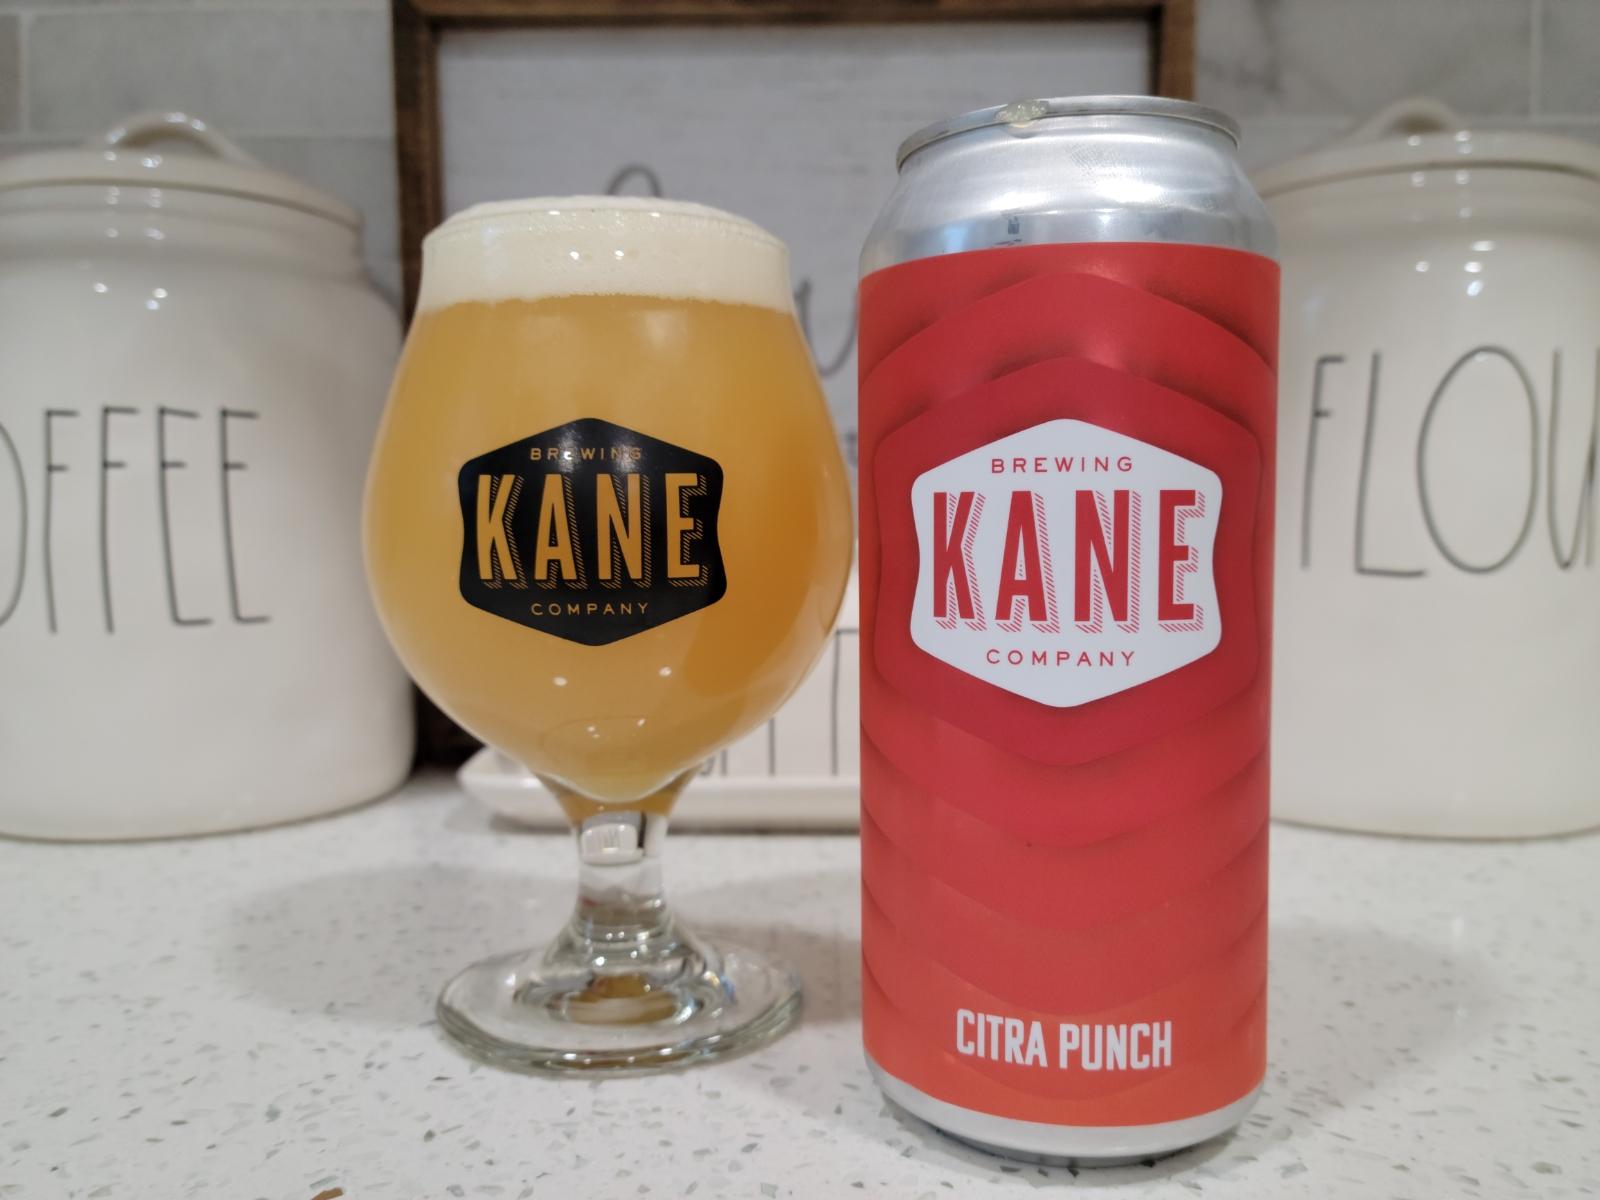 Citra Punch